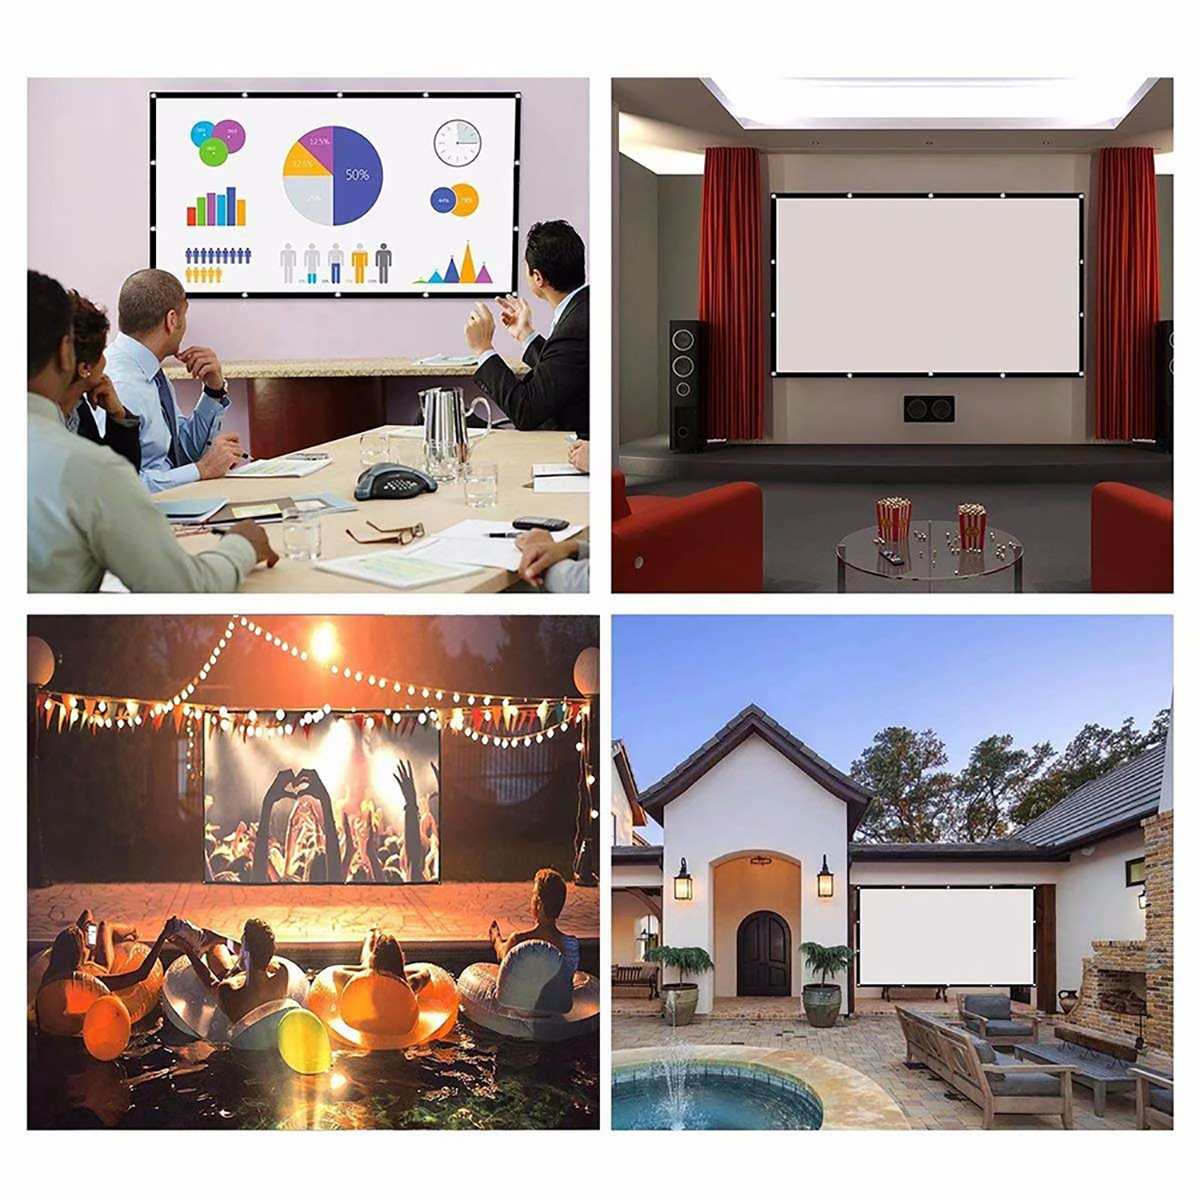 Projector Screen 60 72 84 100 120 Inch 3D Hd Wandmontage Draagbare Projectiescherm Canvas Led Projector Voor Thuis theater